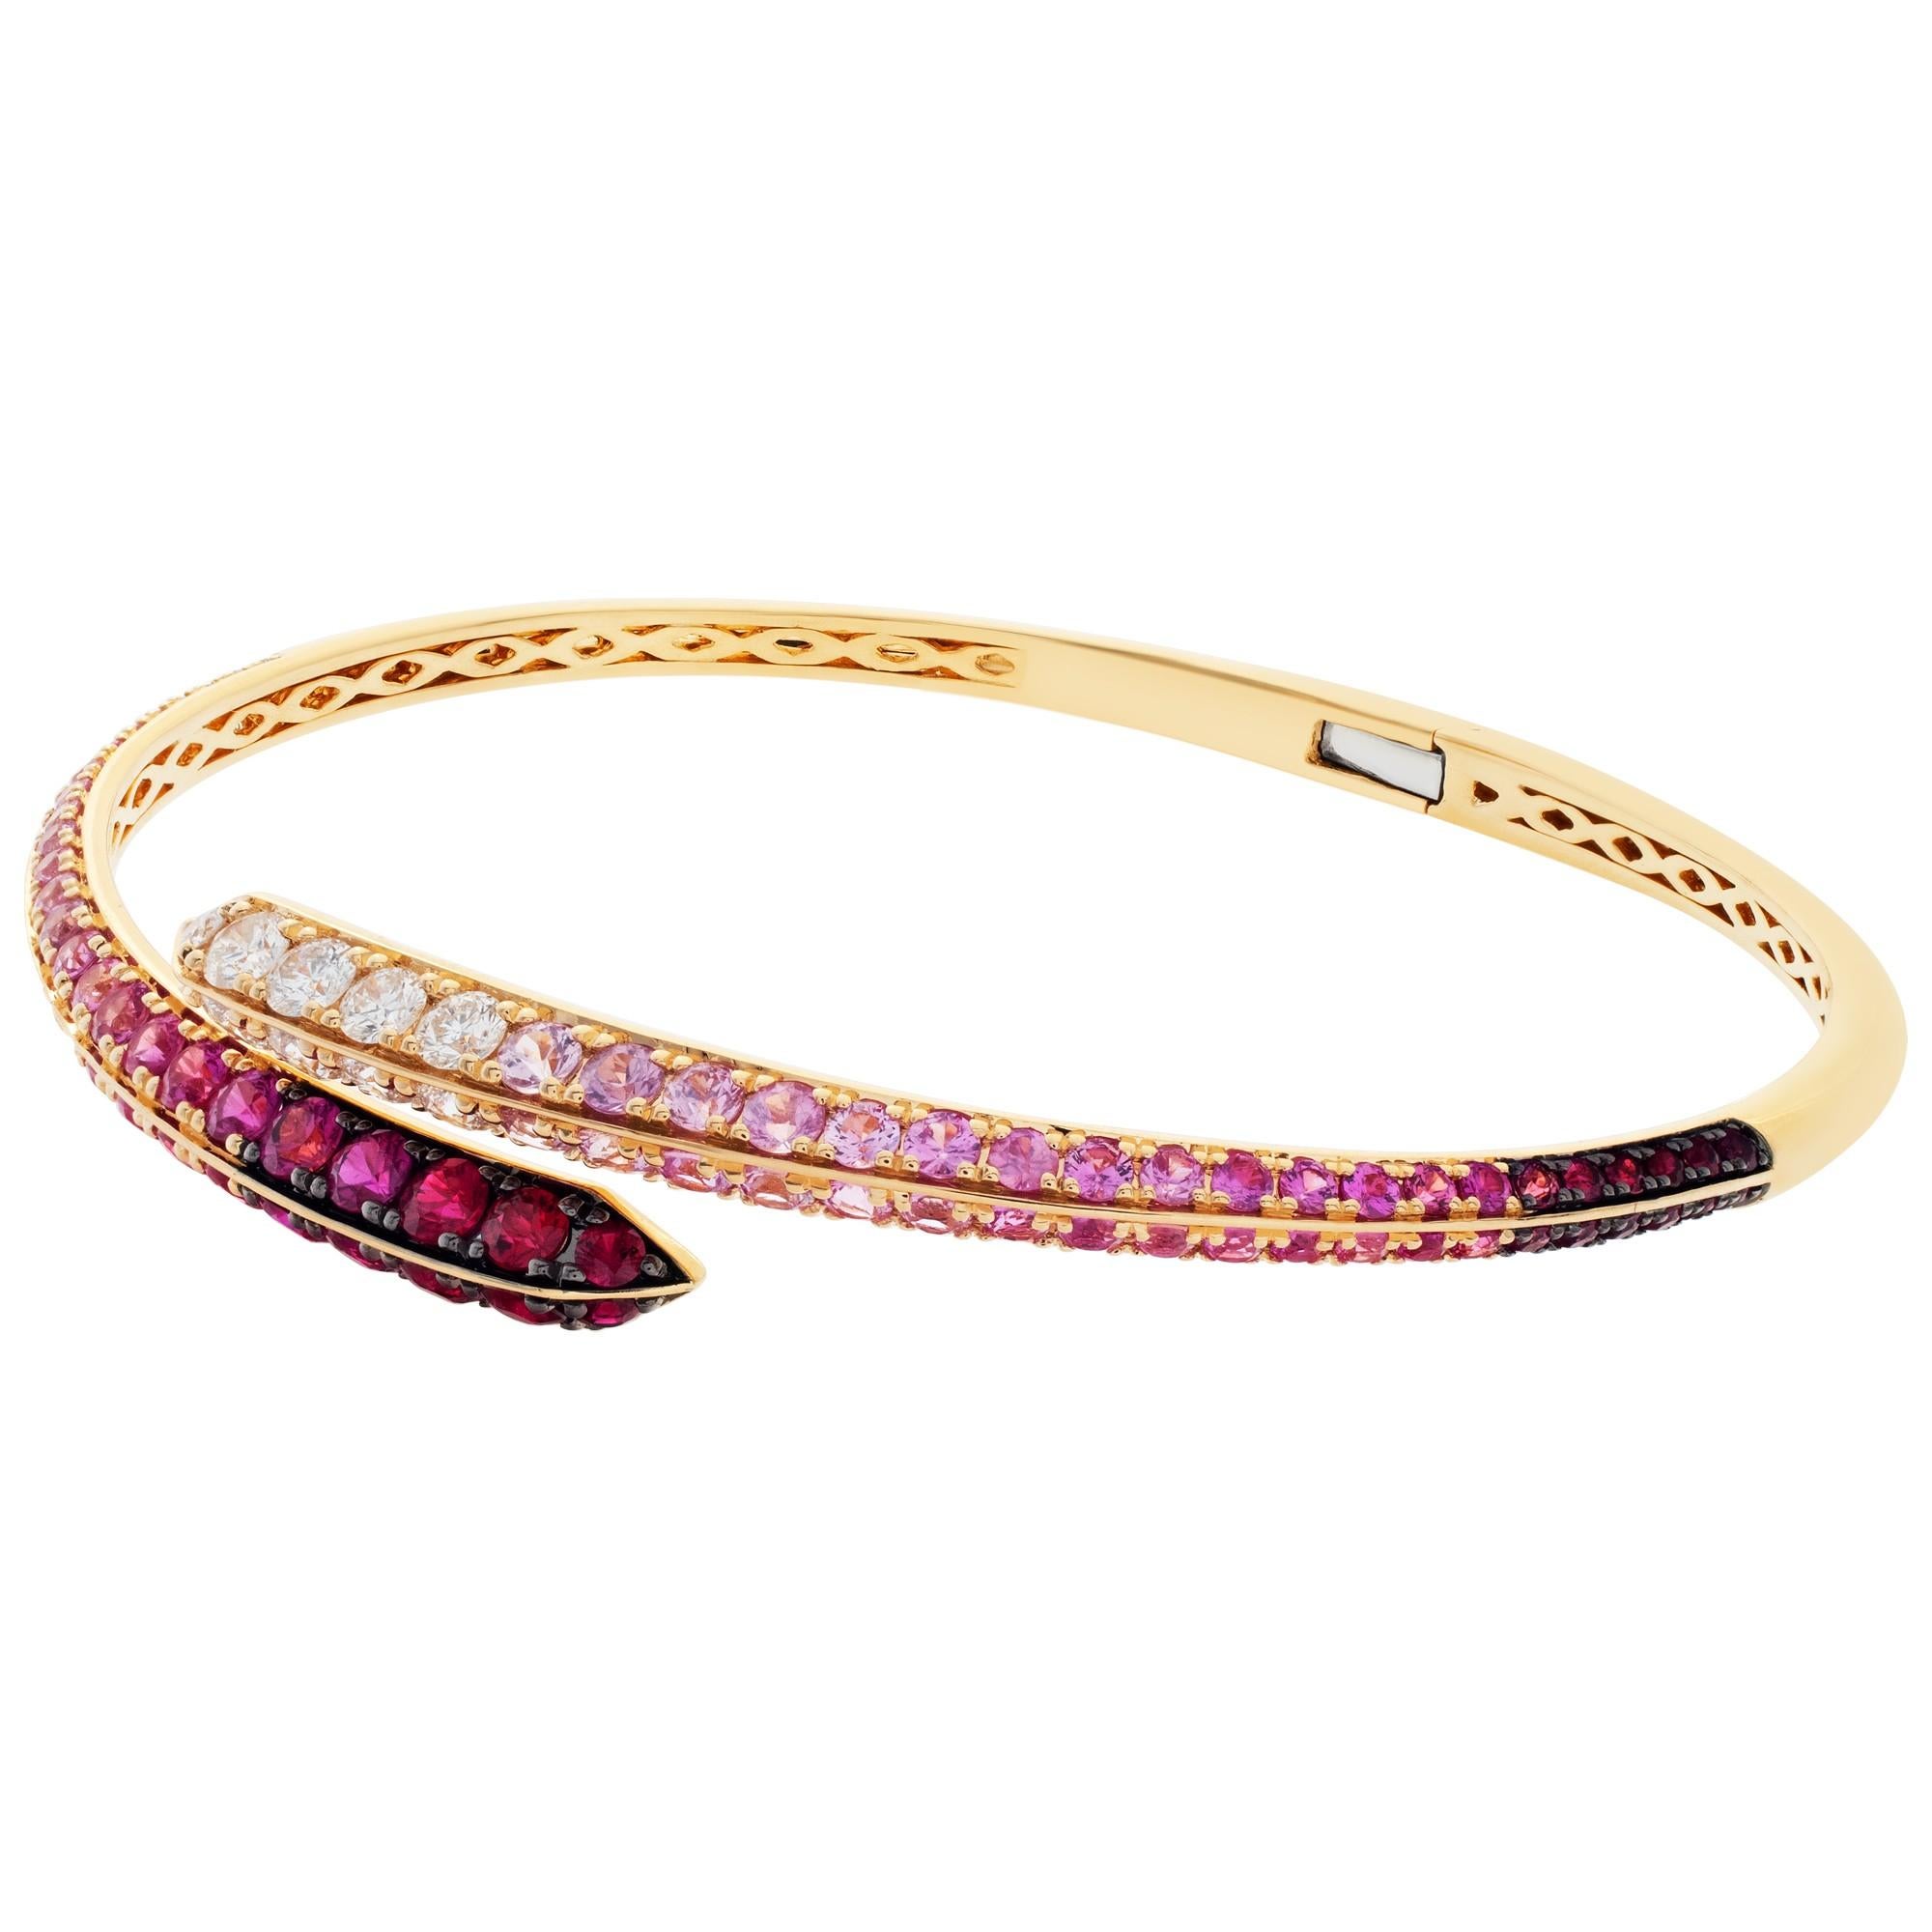 Round Cut Gradient Pink Sapphires, Ruby and Diamond Hinged Bangle Set in 18k Yellow Gold